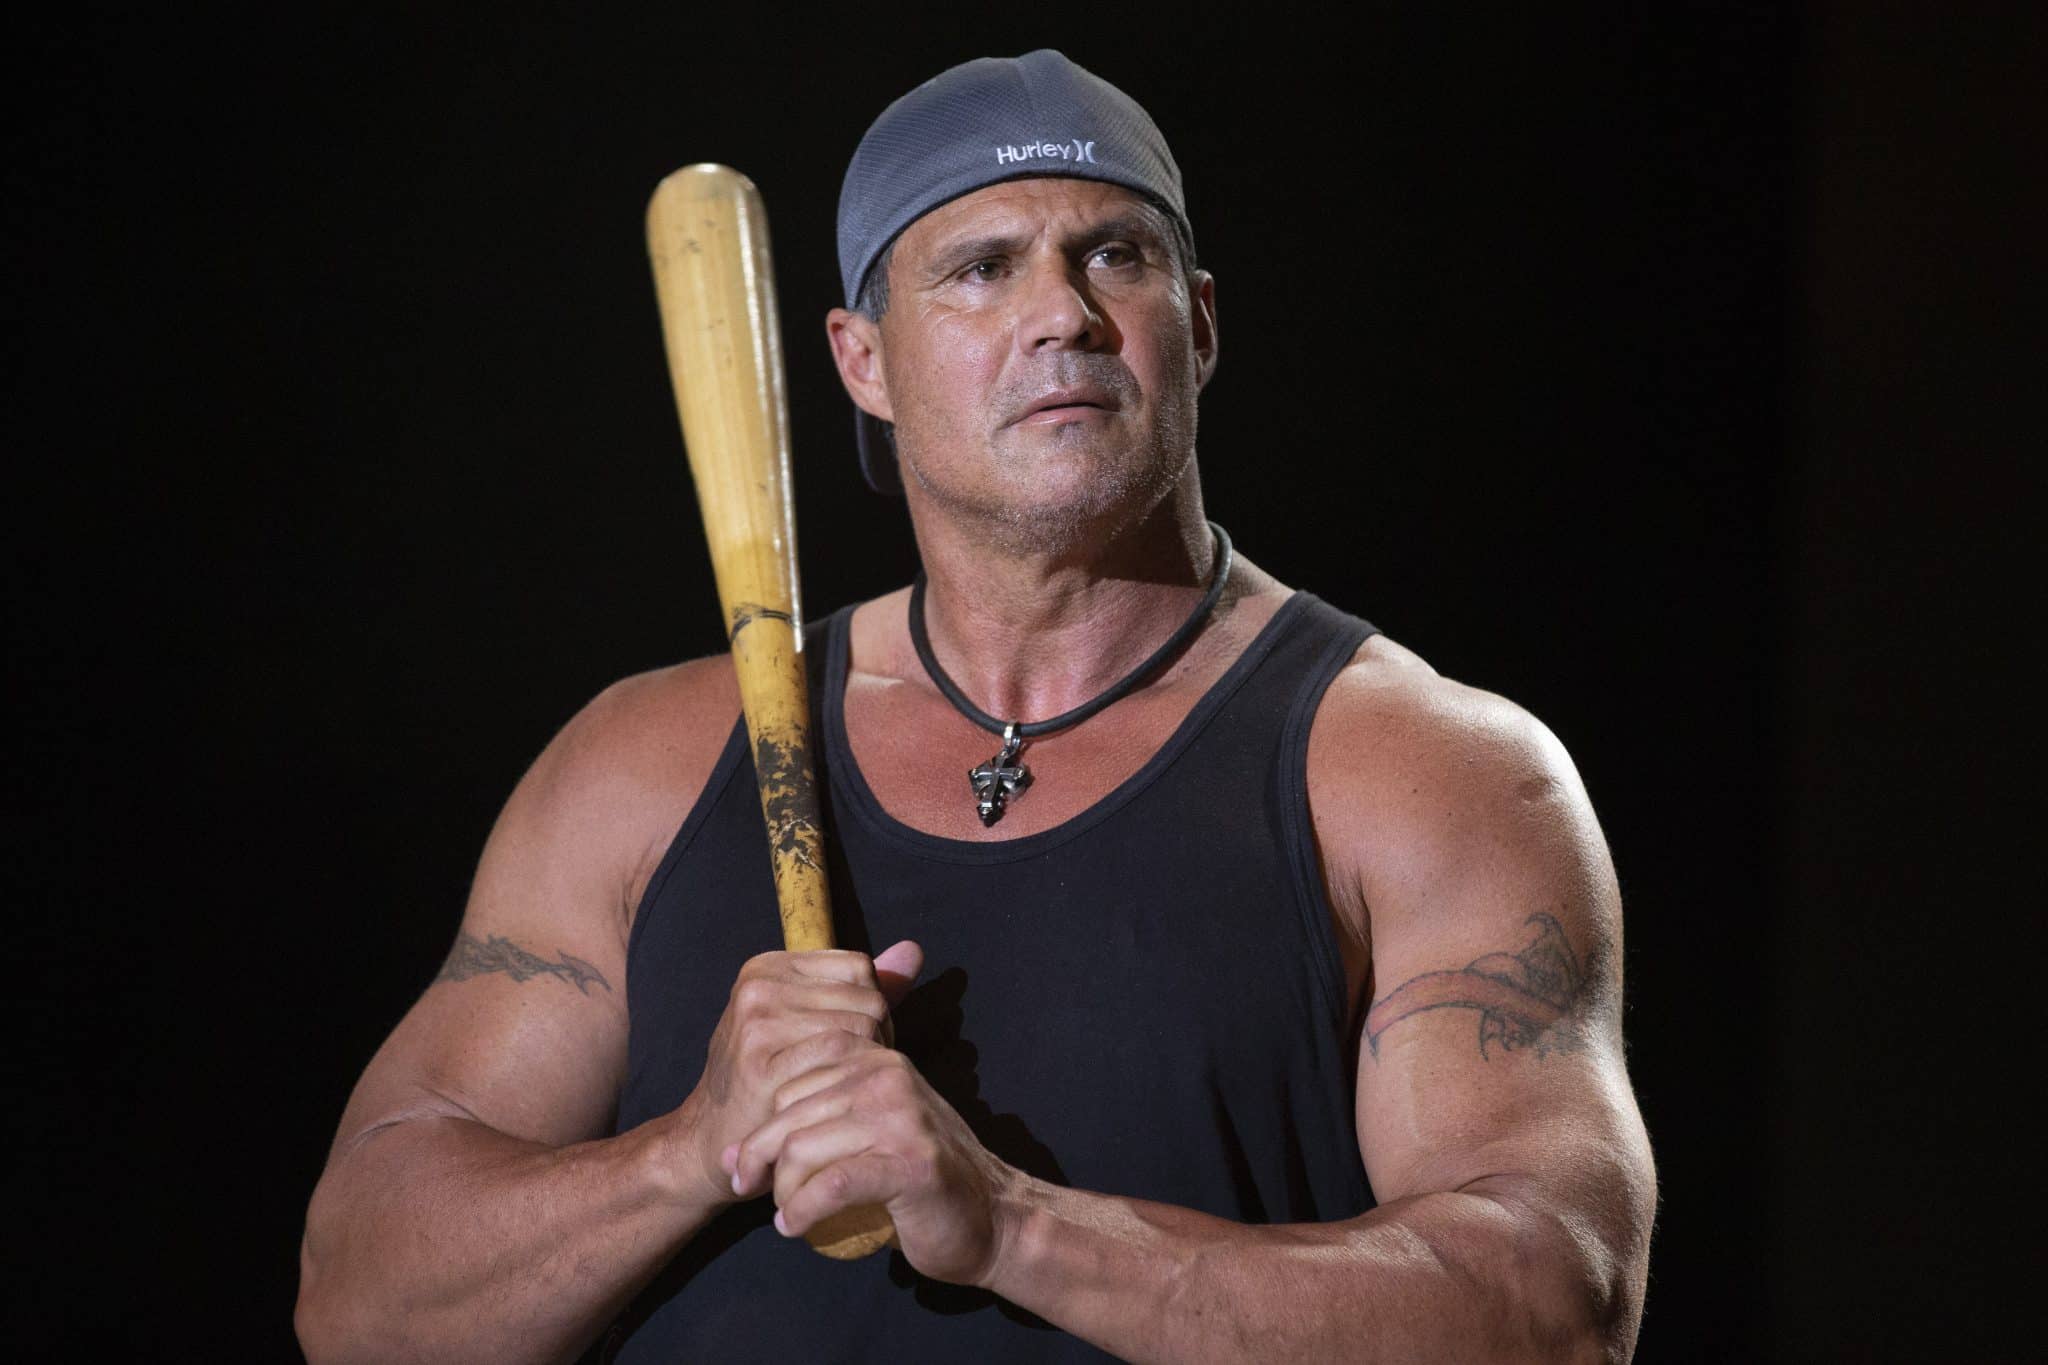 jose canseco